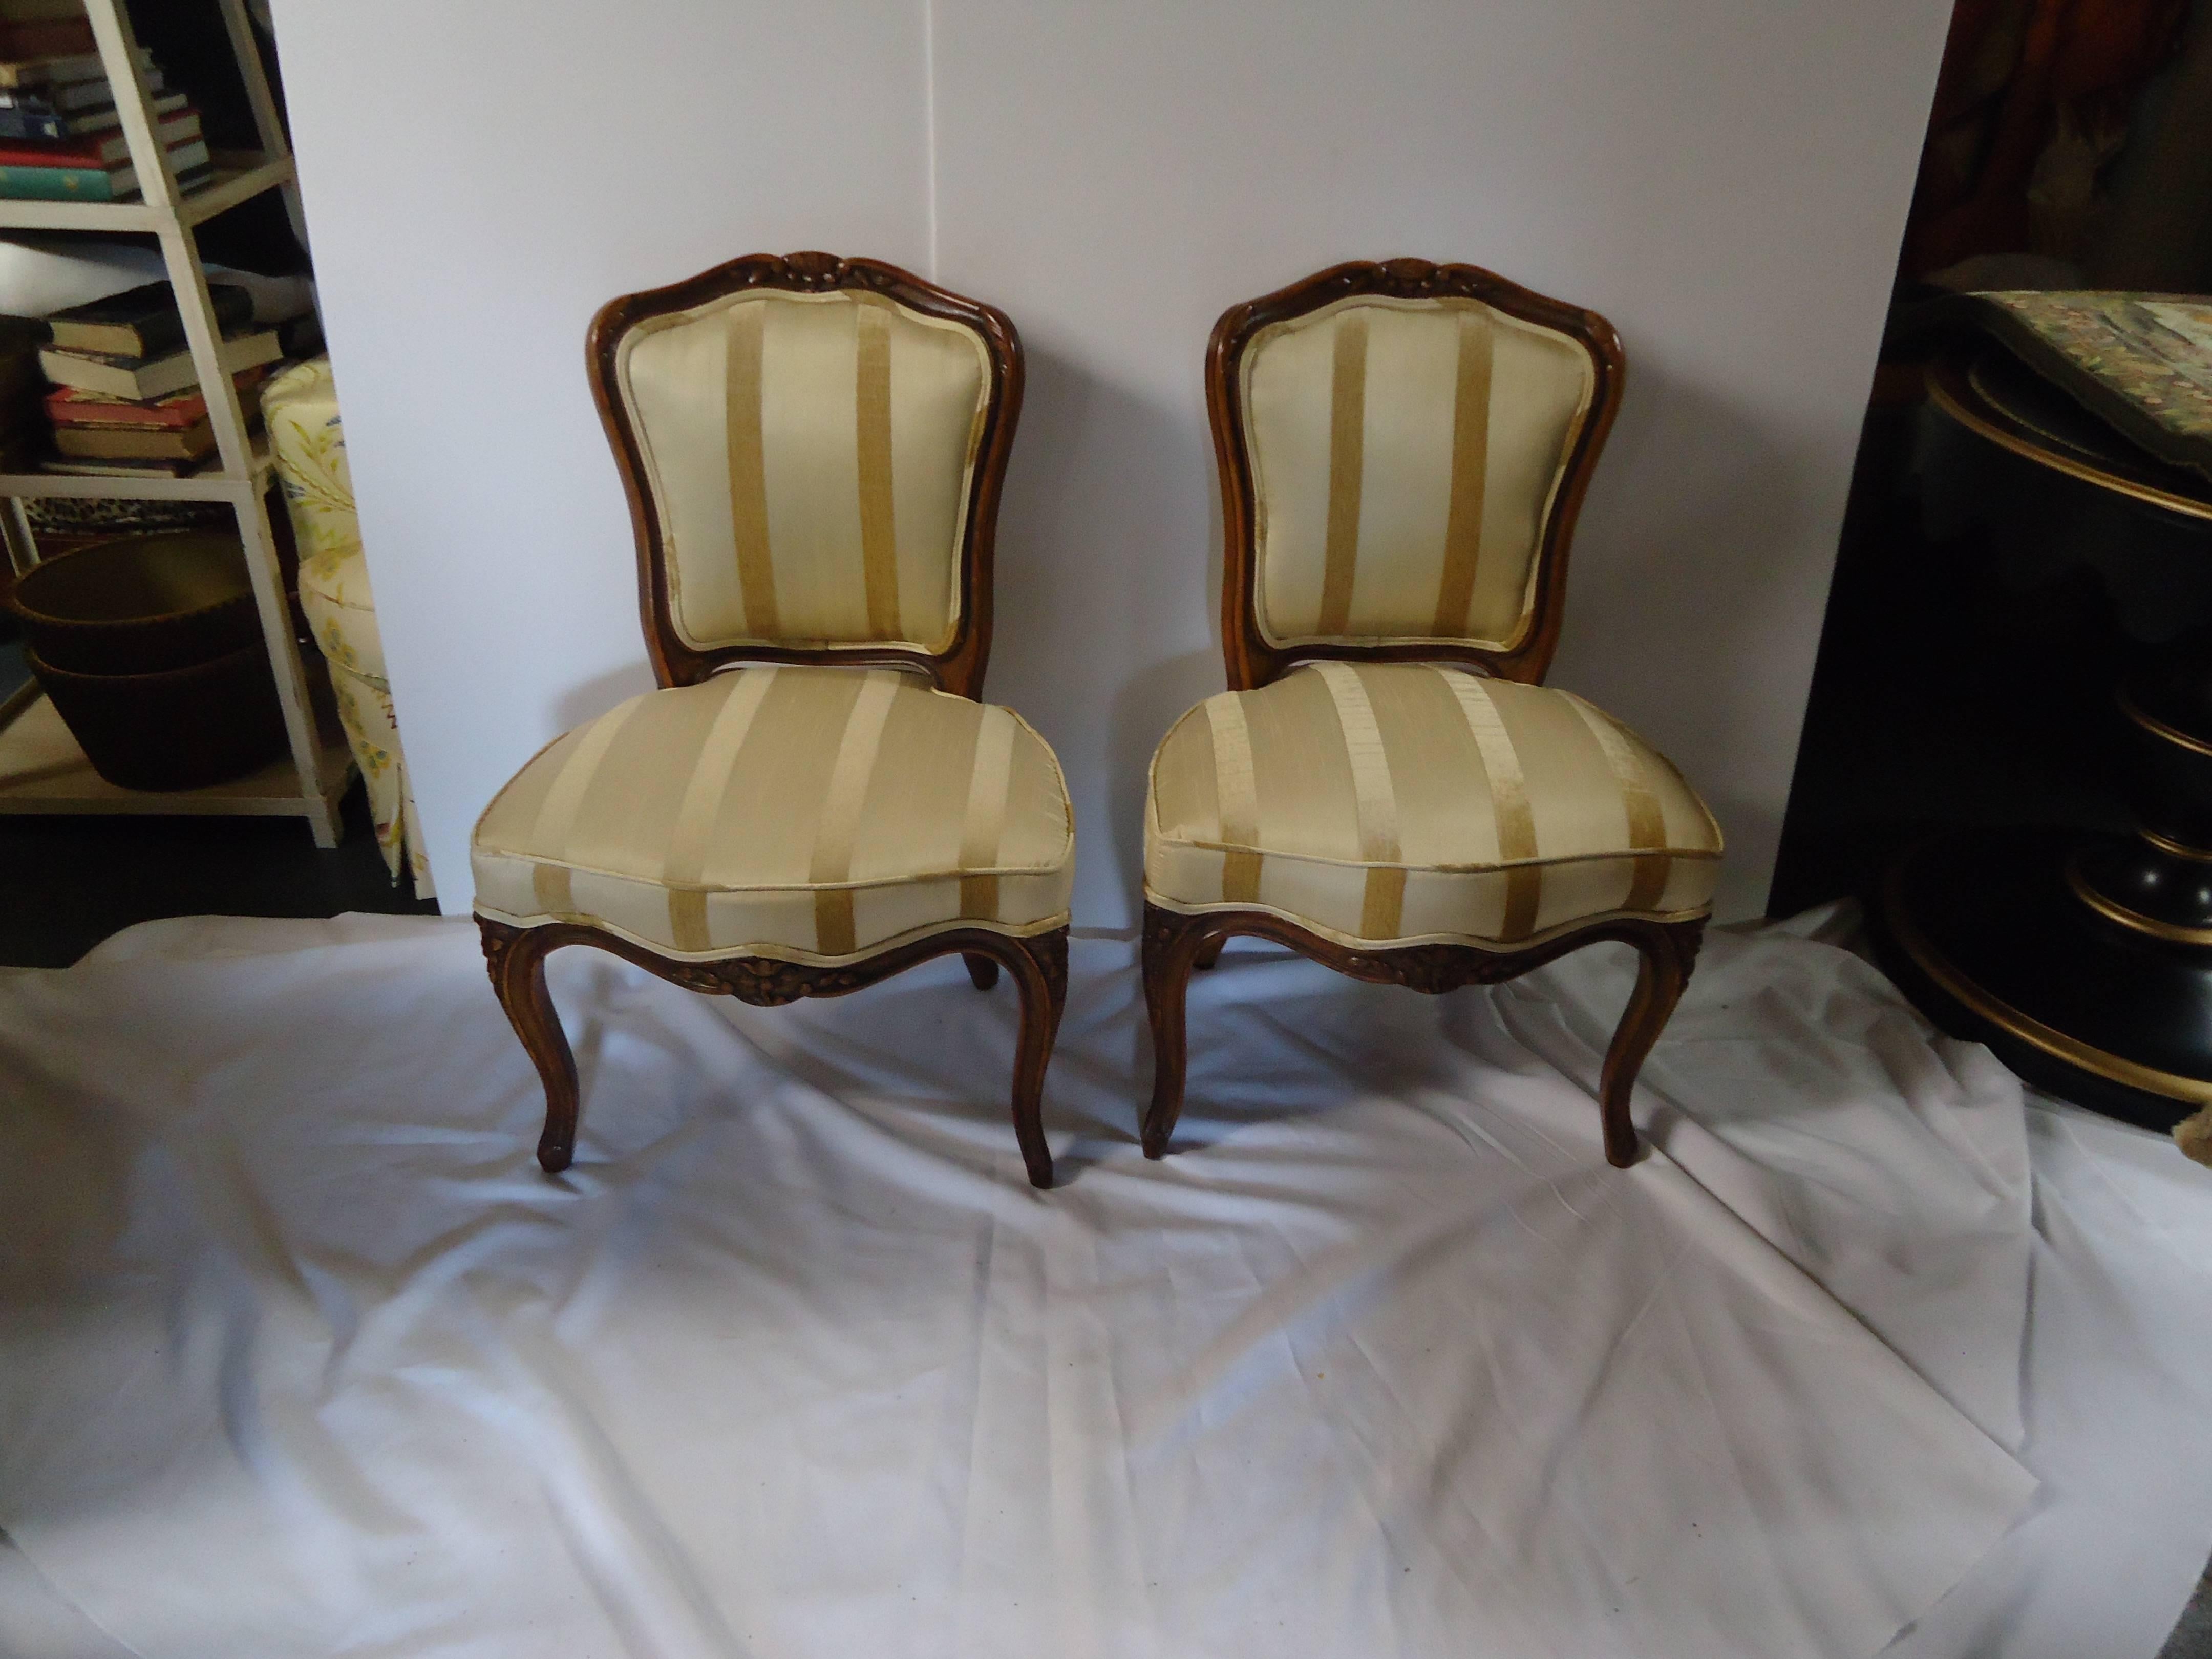 Two movie star gorgeous slipper chairs with carved walnut frames, upholstered in light sand raw silk and velvet striped fabric. Cabriole legs and pretty cartouches at the top.